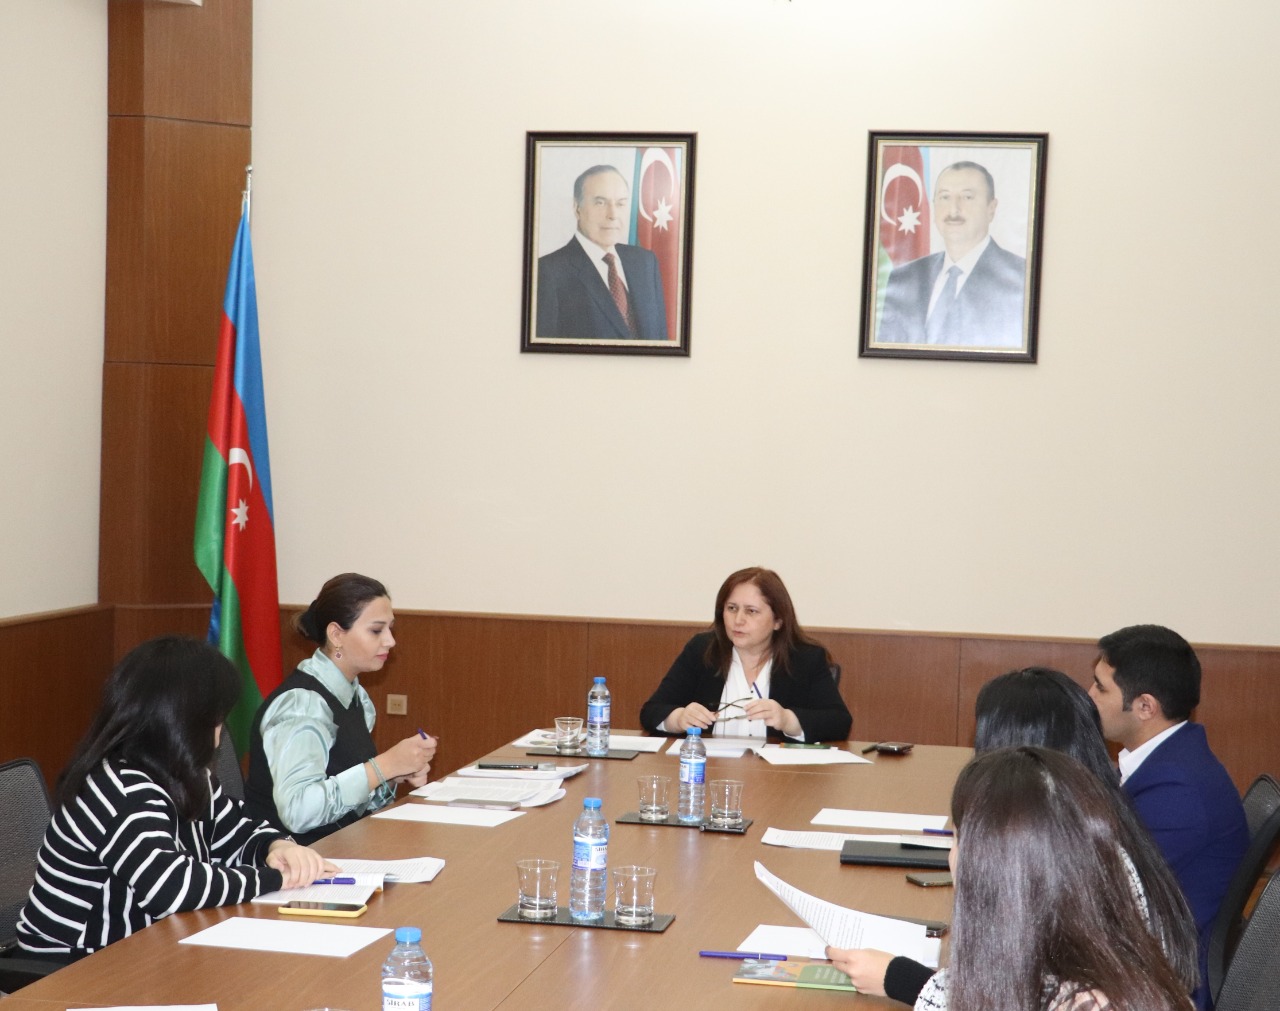 A meeting of the Expert Council on the age classification of information products was held in the State Committee